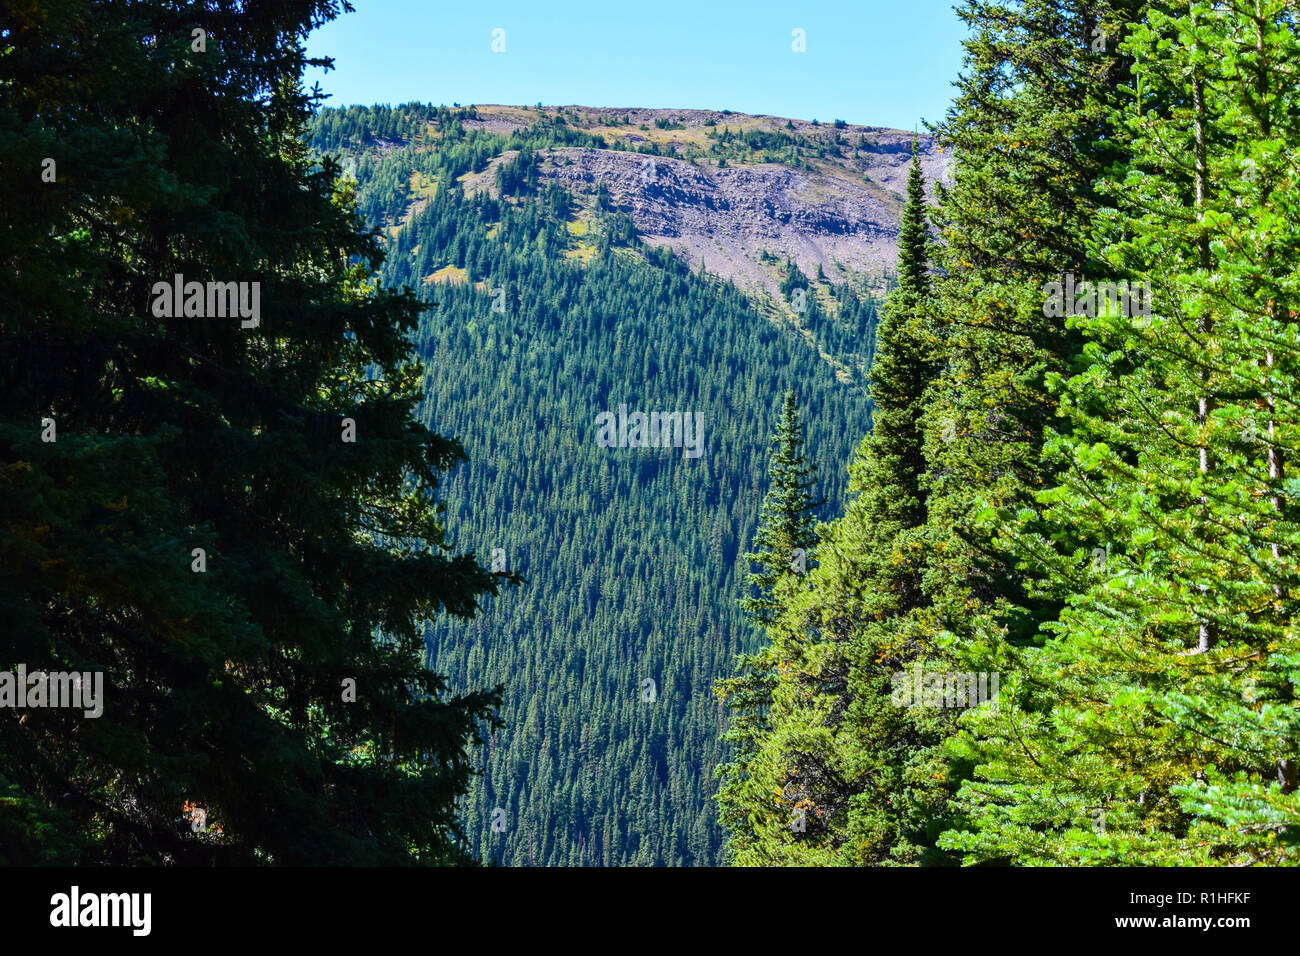 peaks, valleys, meadows  and other scenery in the Rocky mountains of Canada Stock Photo